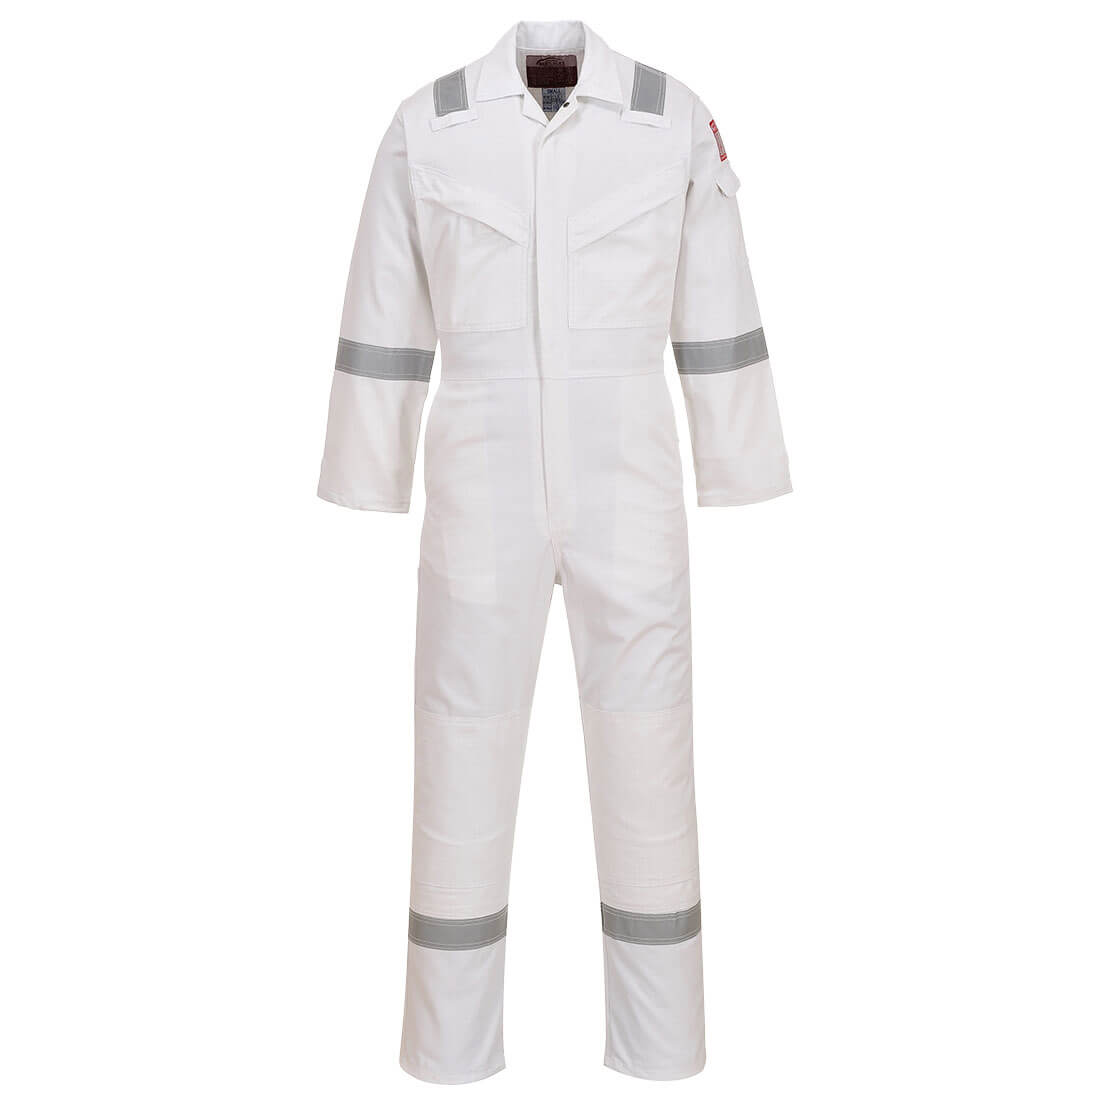 Image of Biz Flame Mens Aberdeen Flame Resistant Antistatic Coverall White L 32"